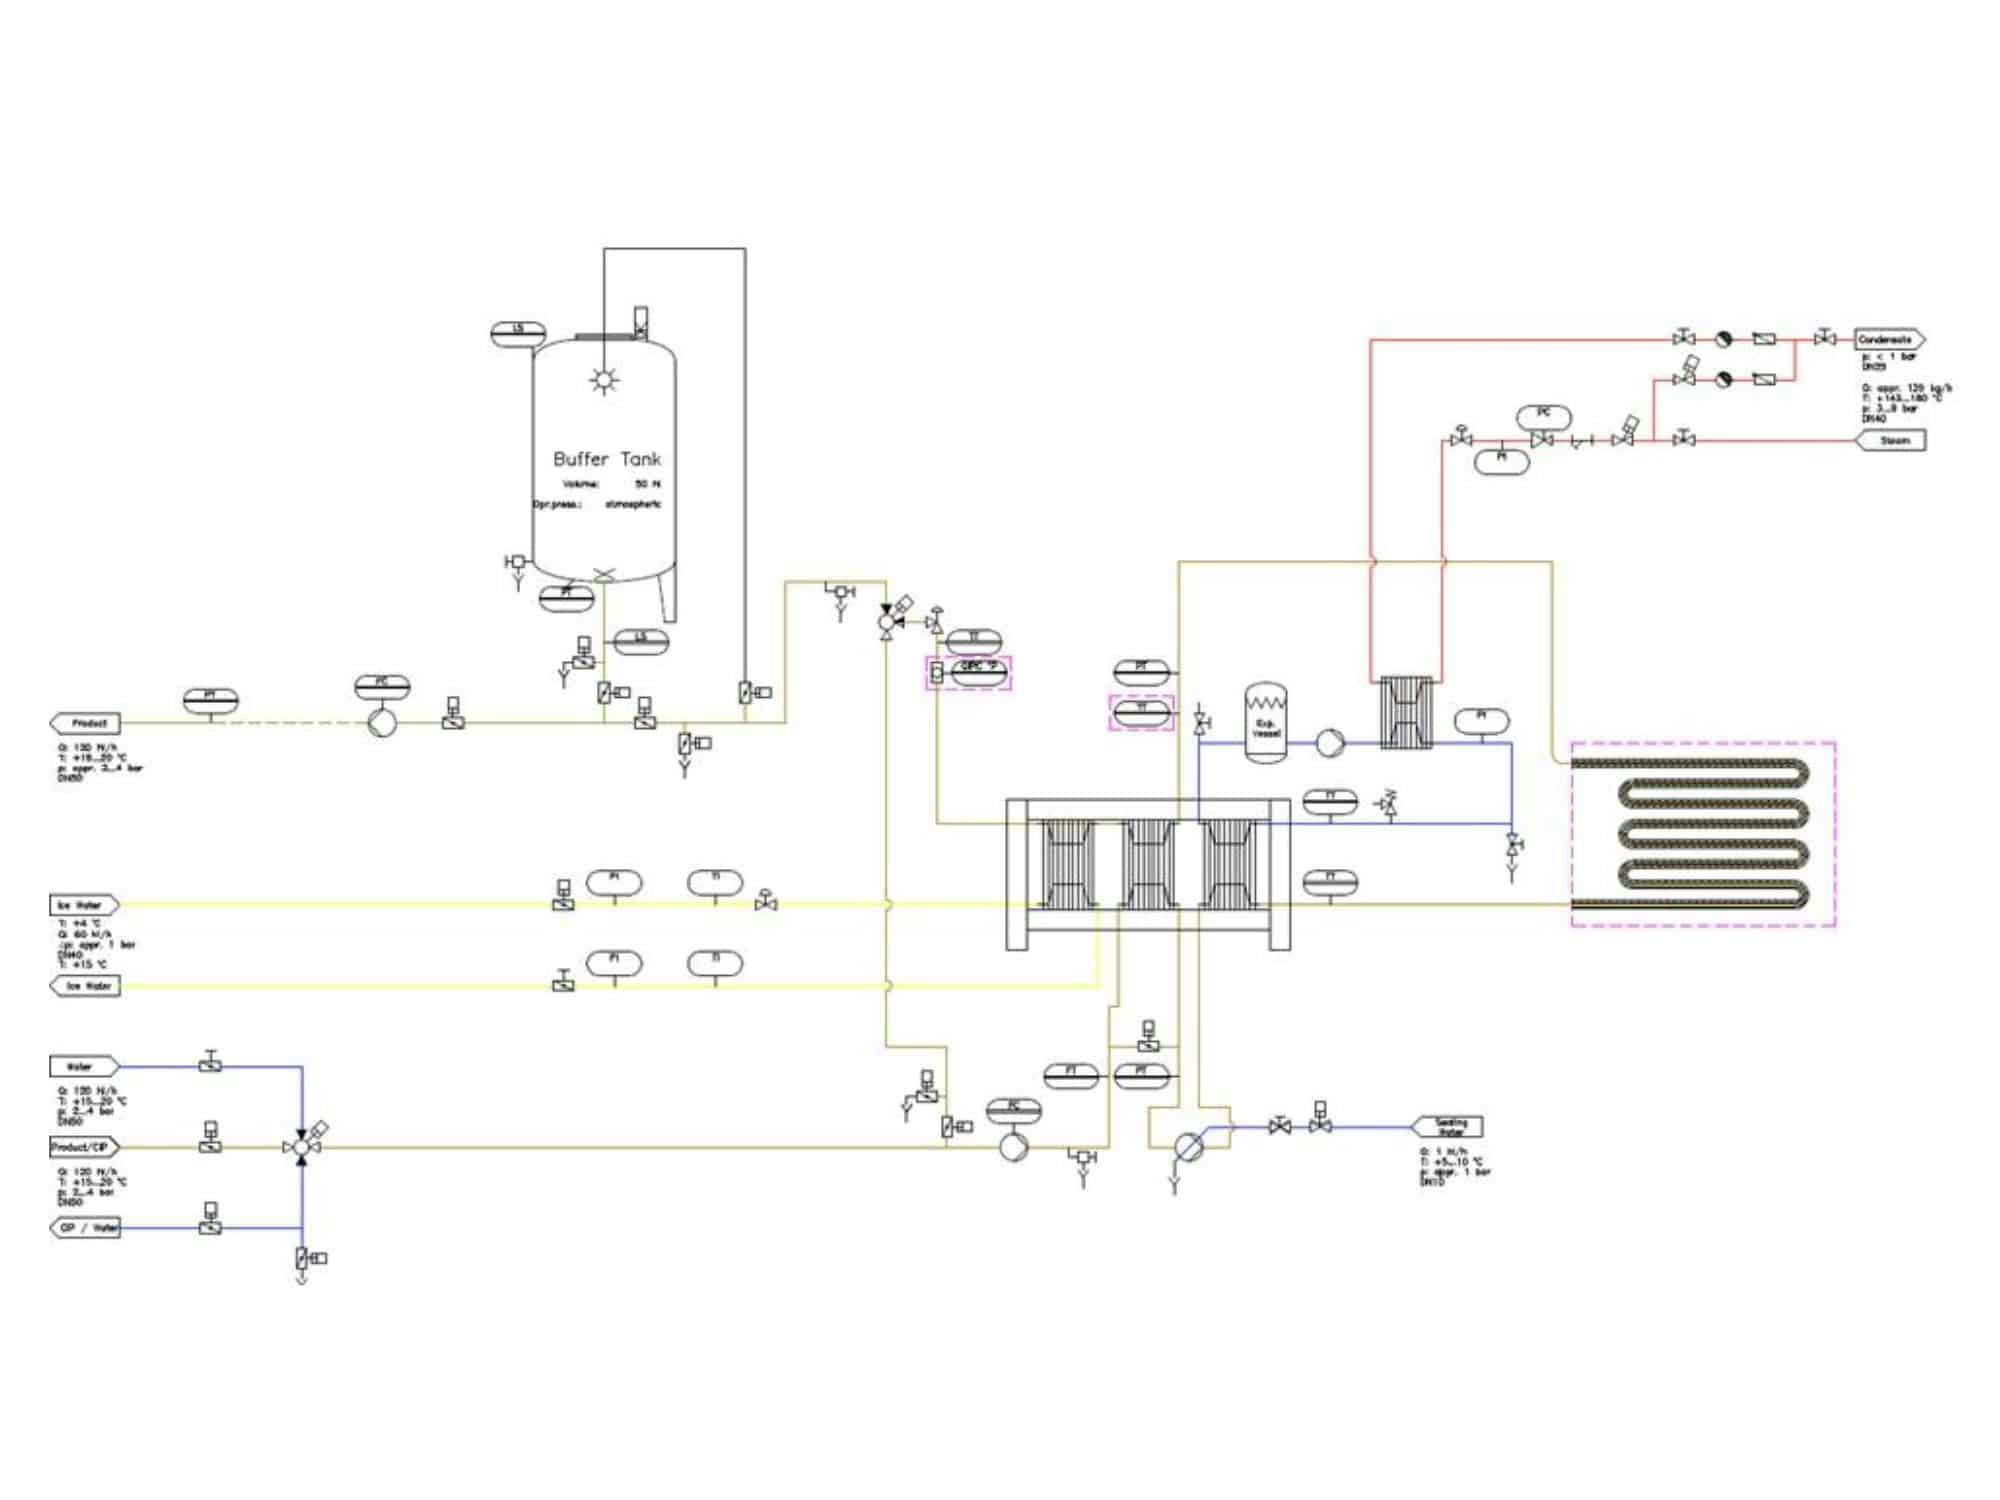 Layout of Cavitator Systems Process Unit (Deaerator, Pasteurizer, Carbonator)